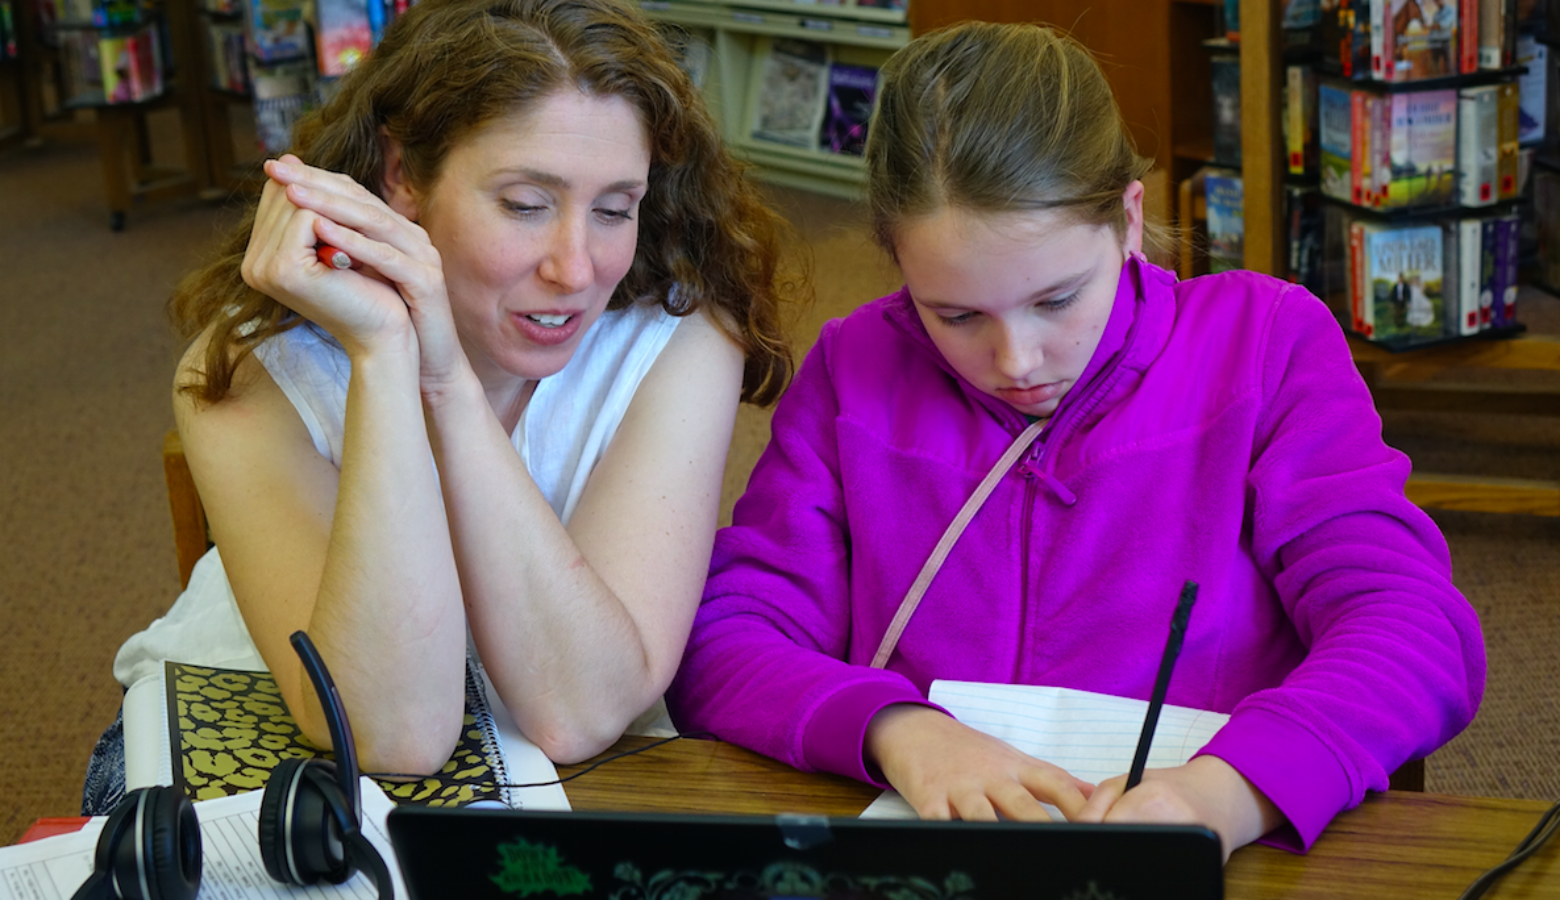 Anna Allman laughs with daughter Piper as they review German language words as part of Piper’s Hoosier Virtual Academy foreign language course at the Mooresville Public Library on April 18, 2017. Allman says she’d be devastated if the school was closed because “individual students that are being positively impacted -- such as our family.” (Eric Weddle/WFYI News)